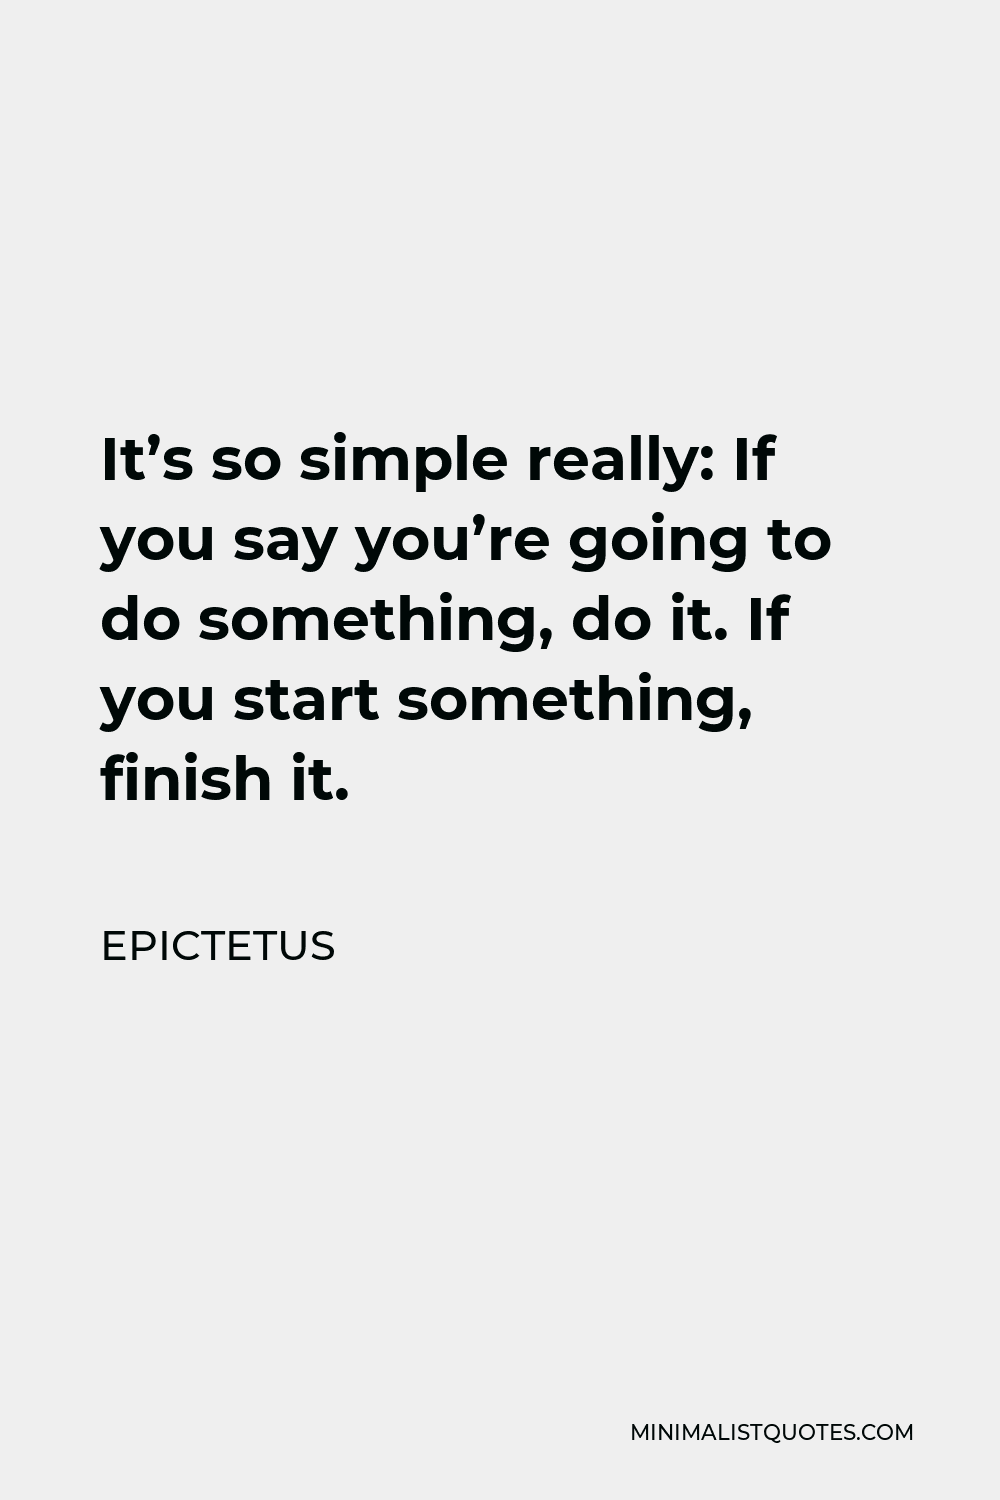 Epictetus Quote - It’s so simple really: If you say you’re going to do something, do it. If you start something, finish it.